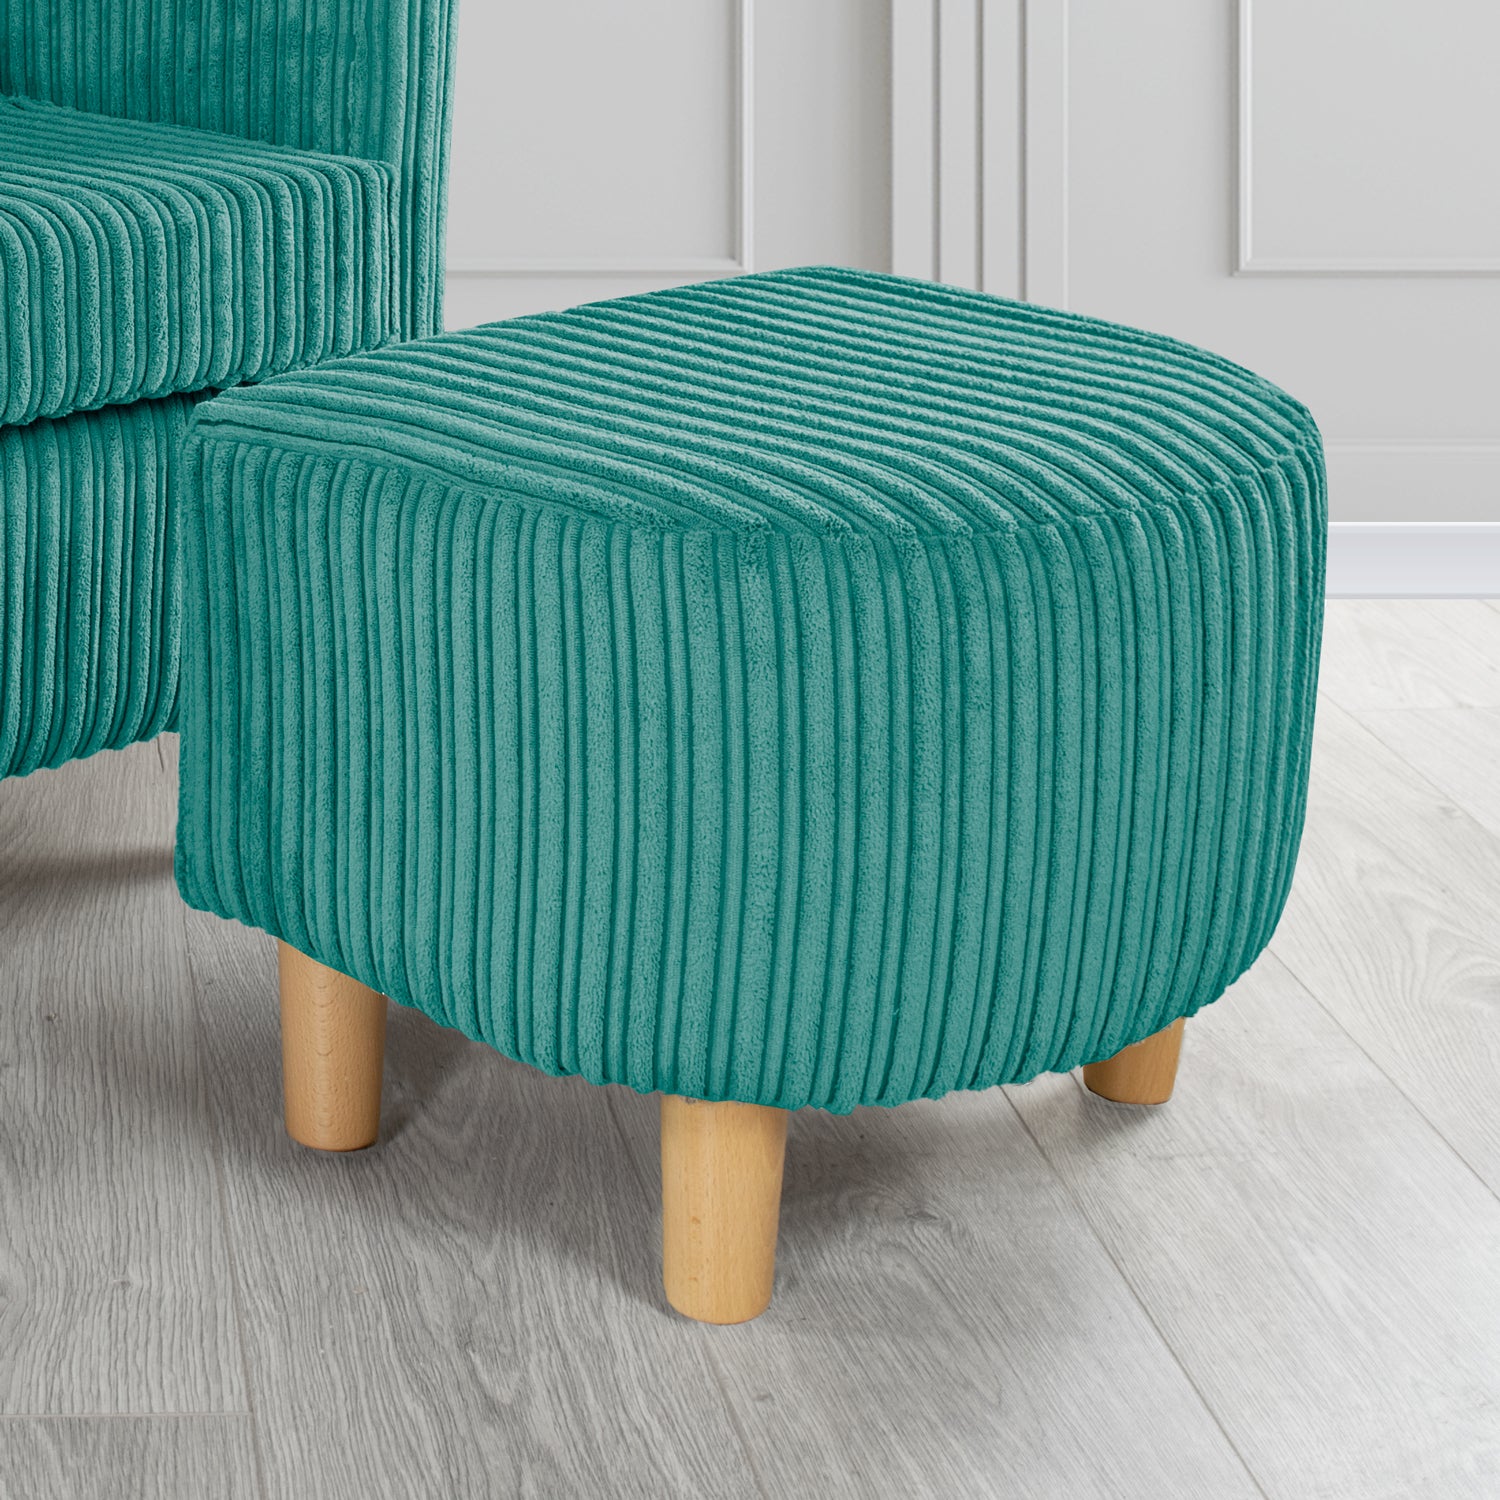 Tuscany Conway Teal Plain Textured Fabric Footstool (6587028045866)